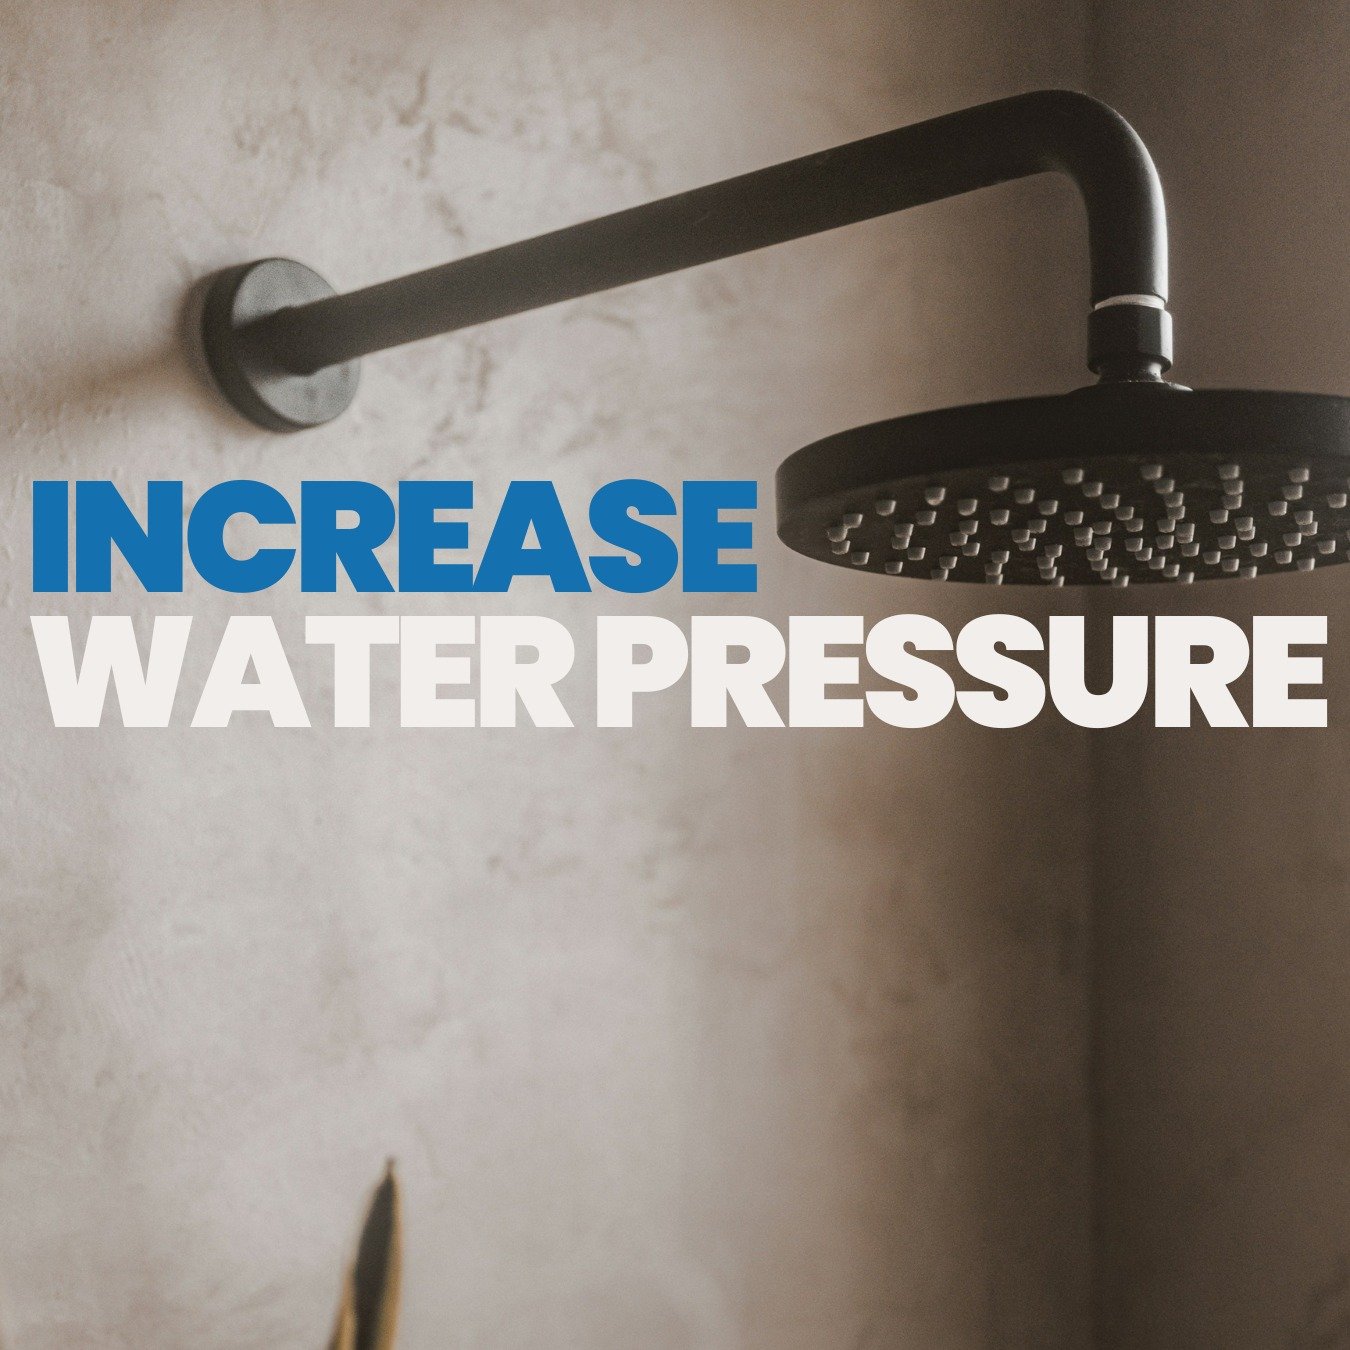 Are you tired of low pressure showers and are you frequently running out of water? Get your Well Harvester today to increase your water pressure, maximize your well&rsquo;s production, and protect your well from over pumping. eppwellsolutions.com